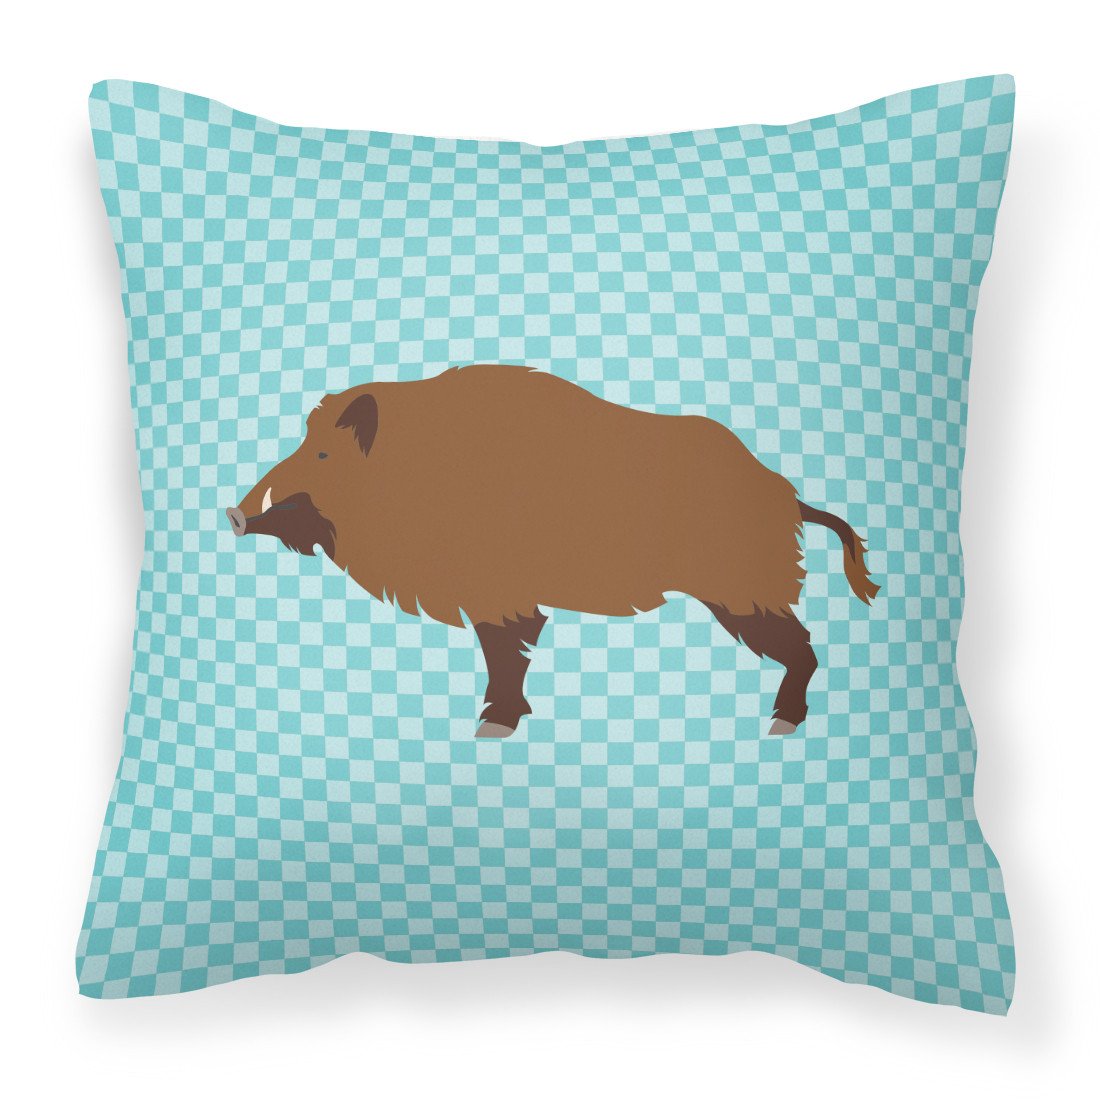 Wild Boar Pig Blue Check Fabric Decorative Pillow BB8110PW1818 by Caroline's Treasures